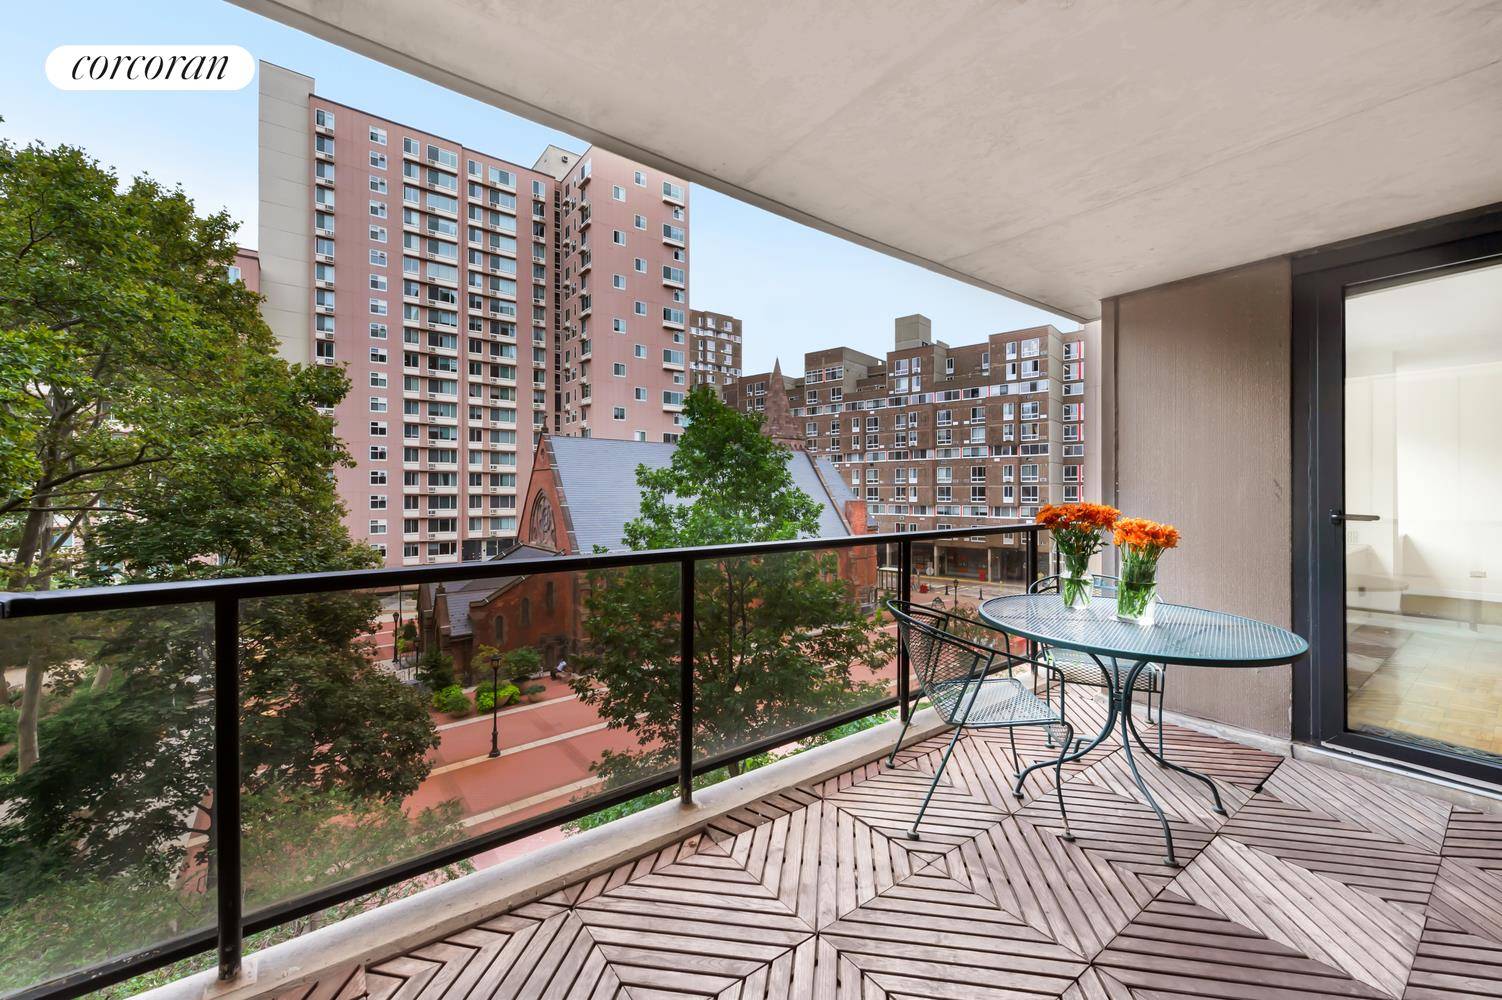 531 Main St, Apt. 813 is a spacious 2BR, 2bth home with large, private balcony in Rivercross, the premier Roosevelt Island coop.